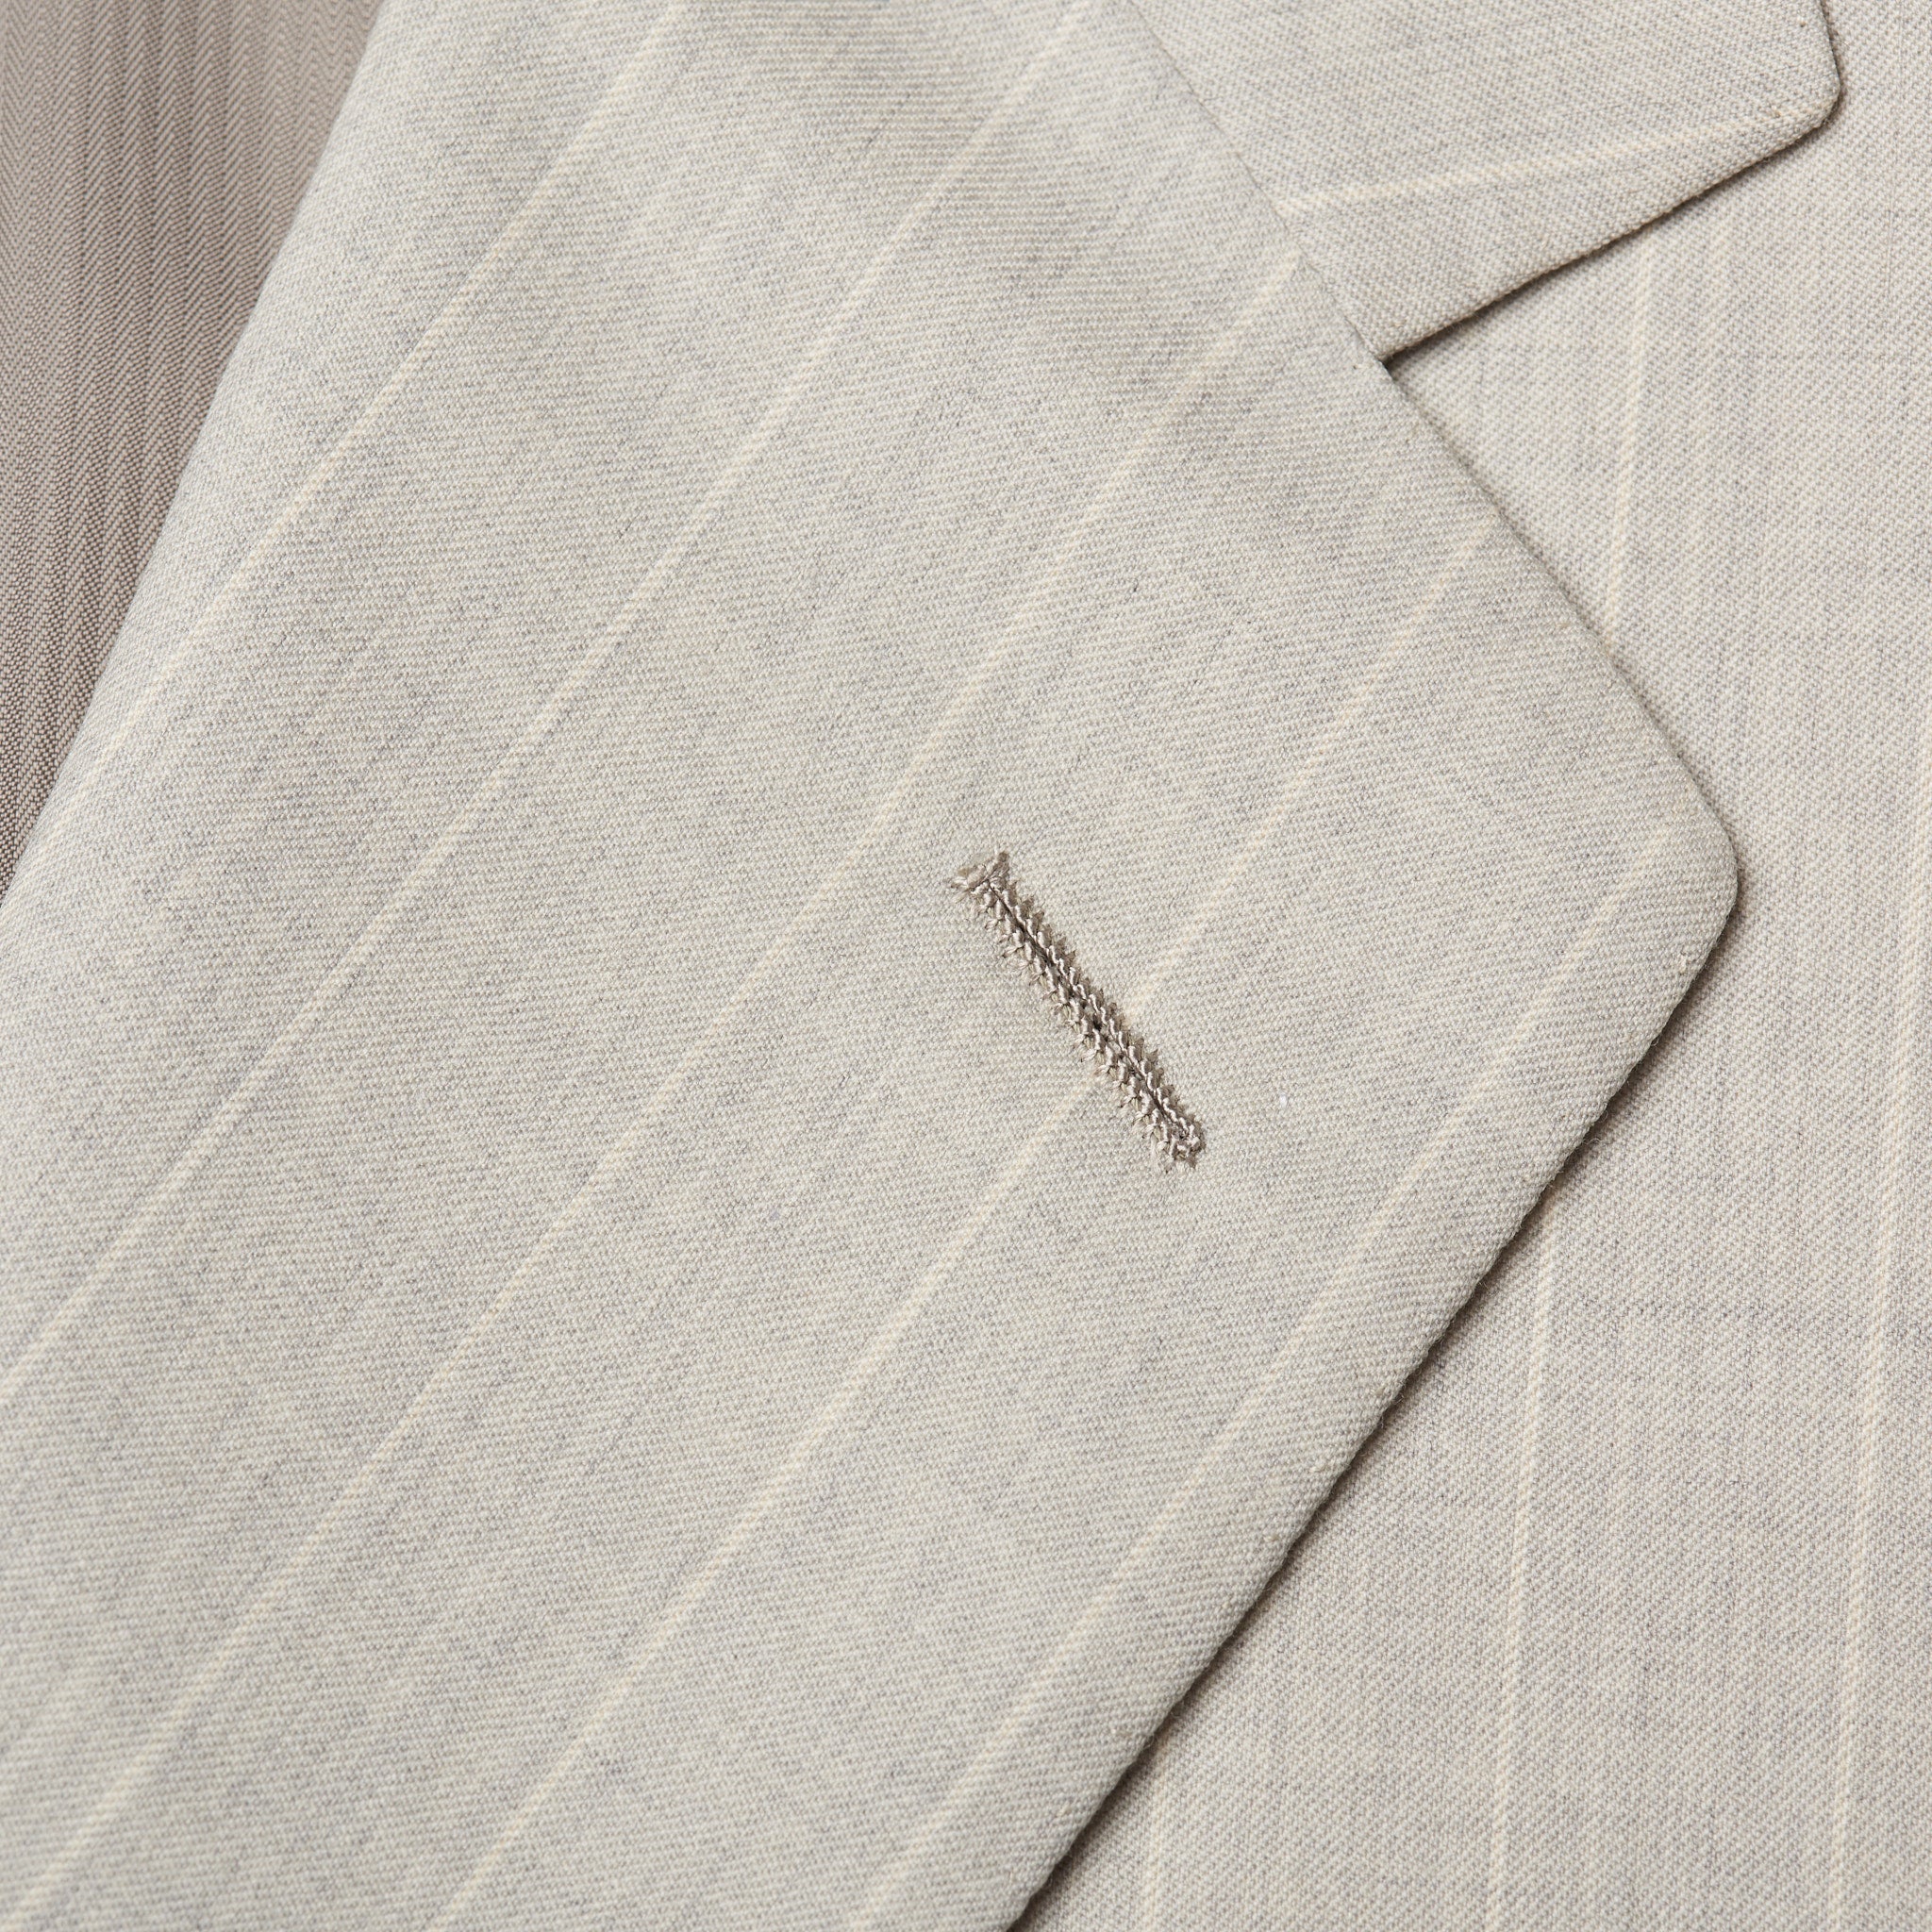 AMIR by D'AVENZA Handmade Gray Striped Wool Super 150’s Suit EU 52 NEW US 42